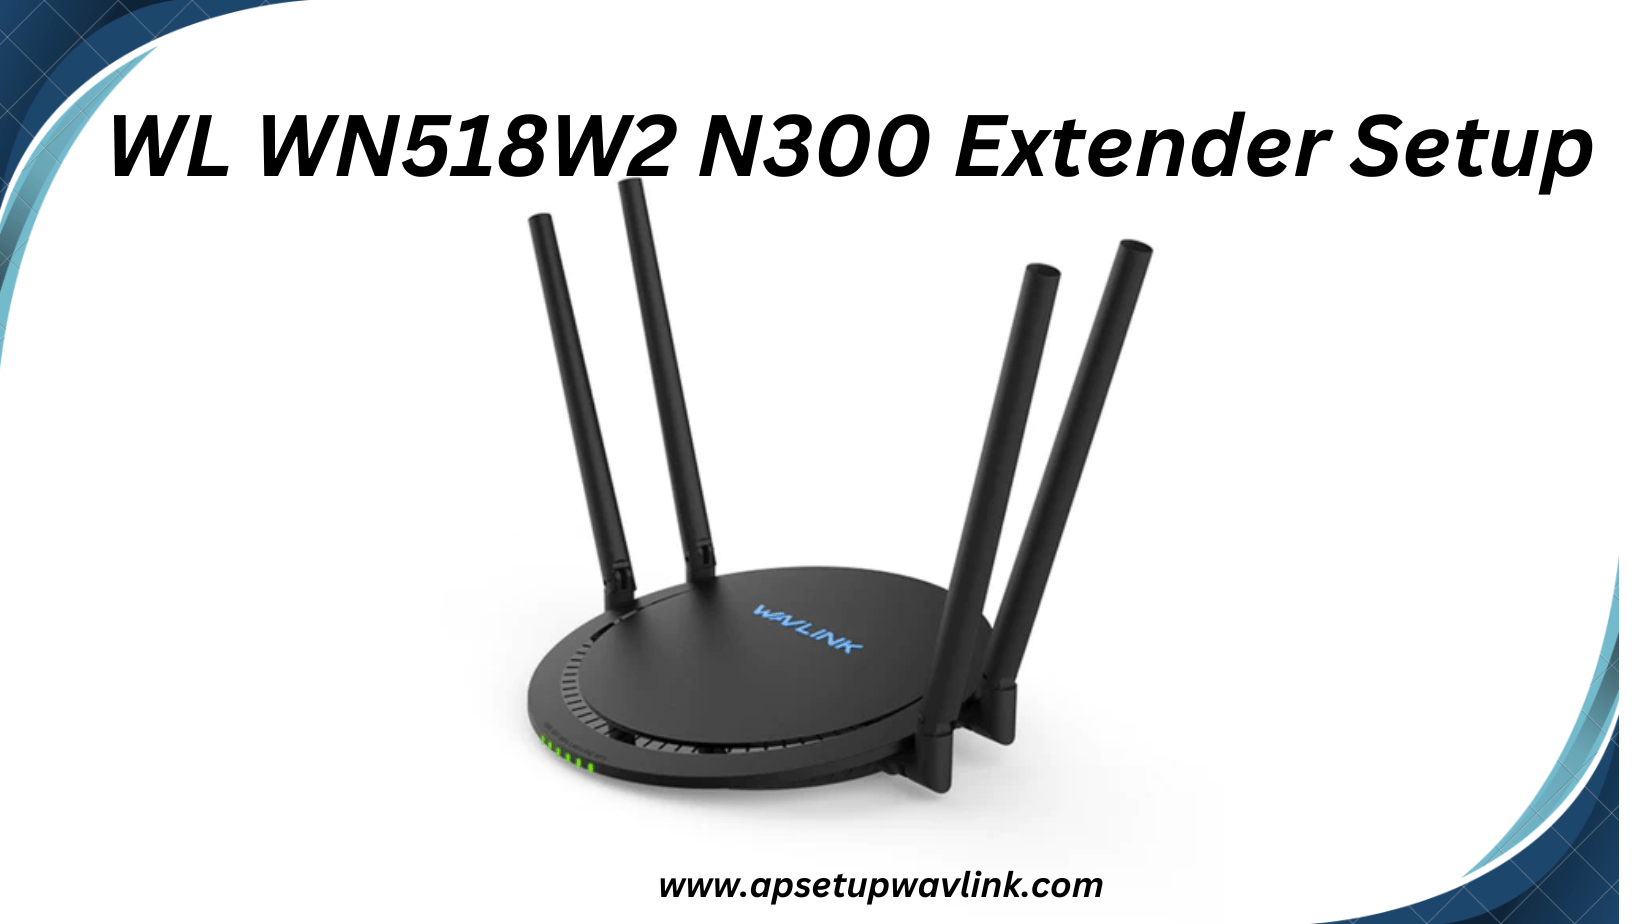 You are currently viewing WL WN518W2 N300 Extender Setup